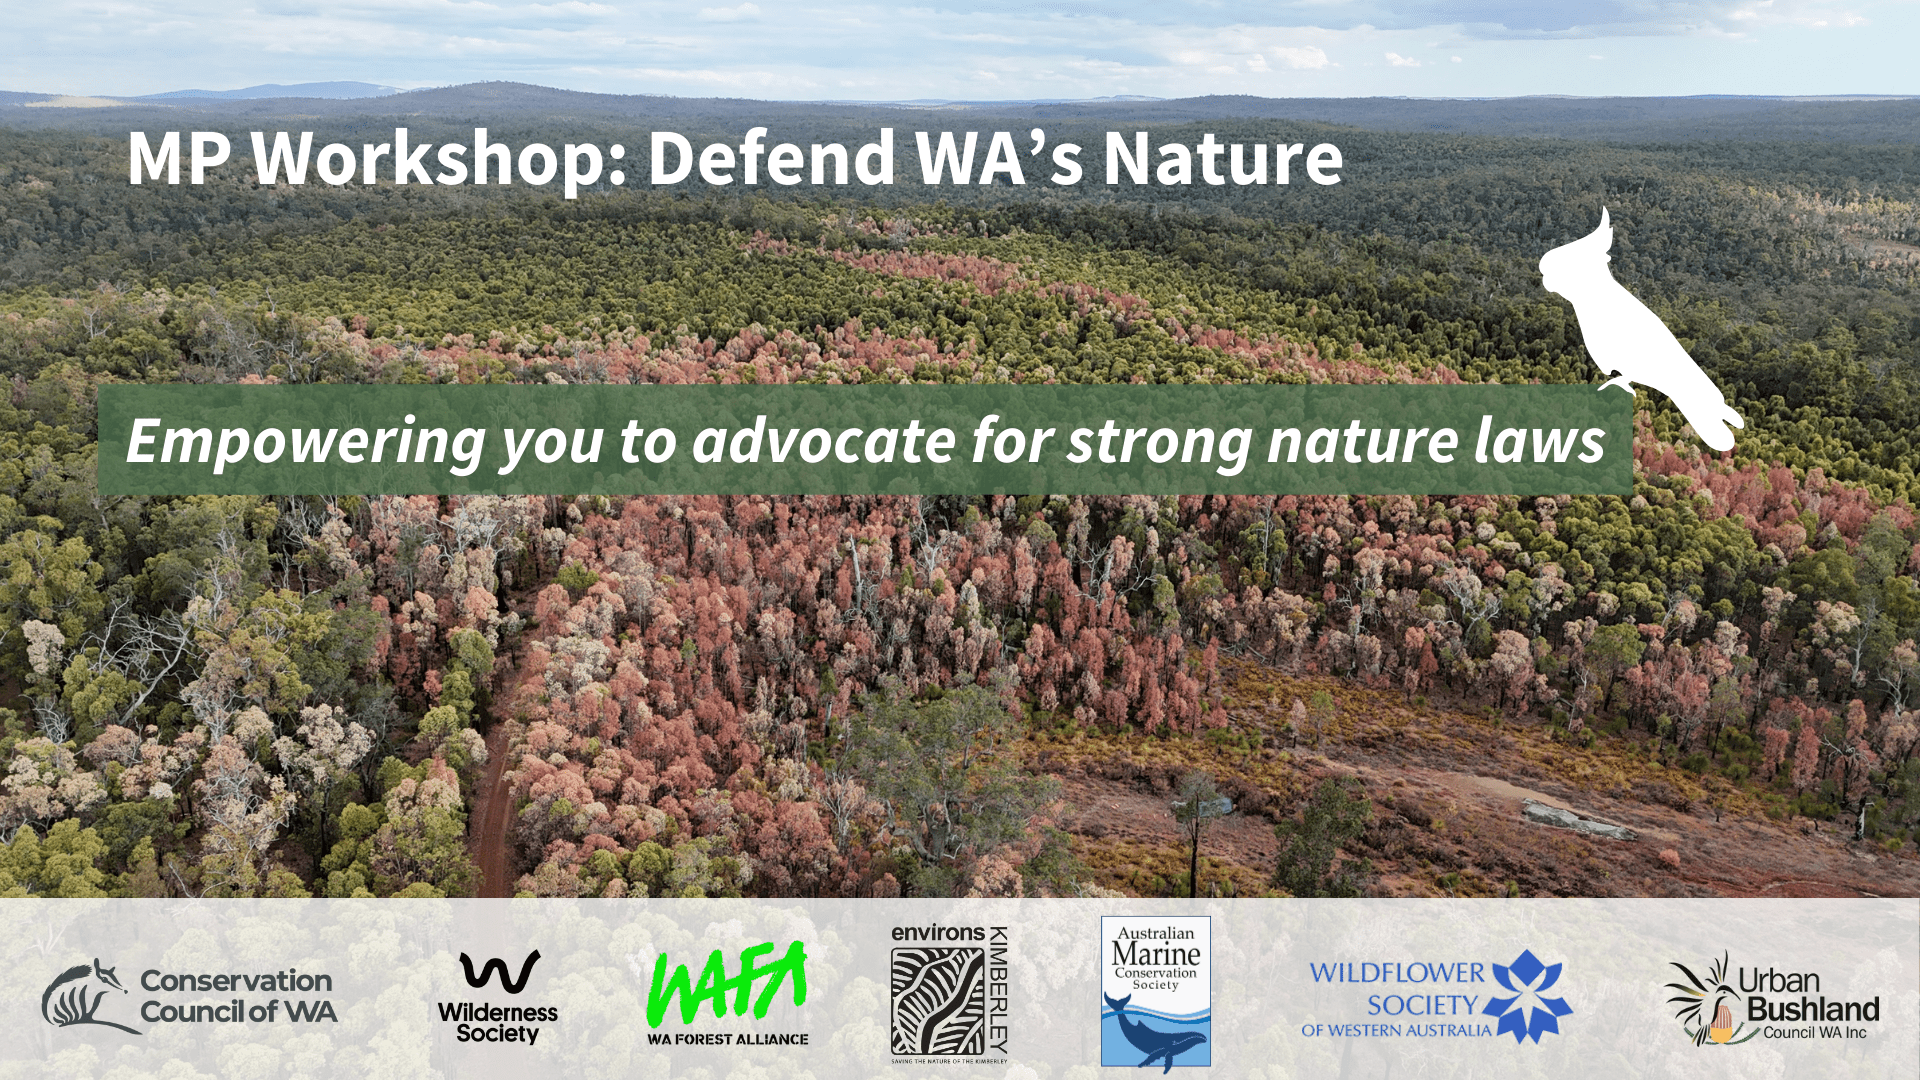 MP Workshop Defend WA’s Nature FB and website event banner